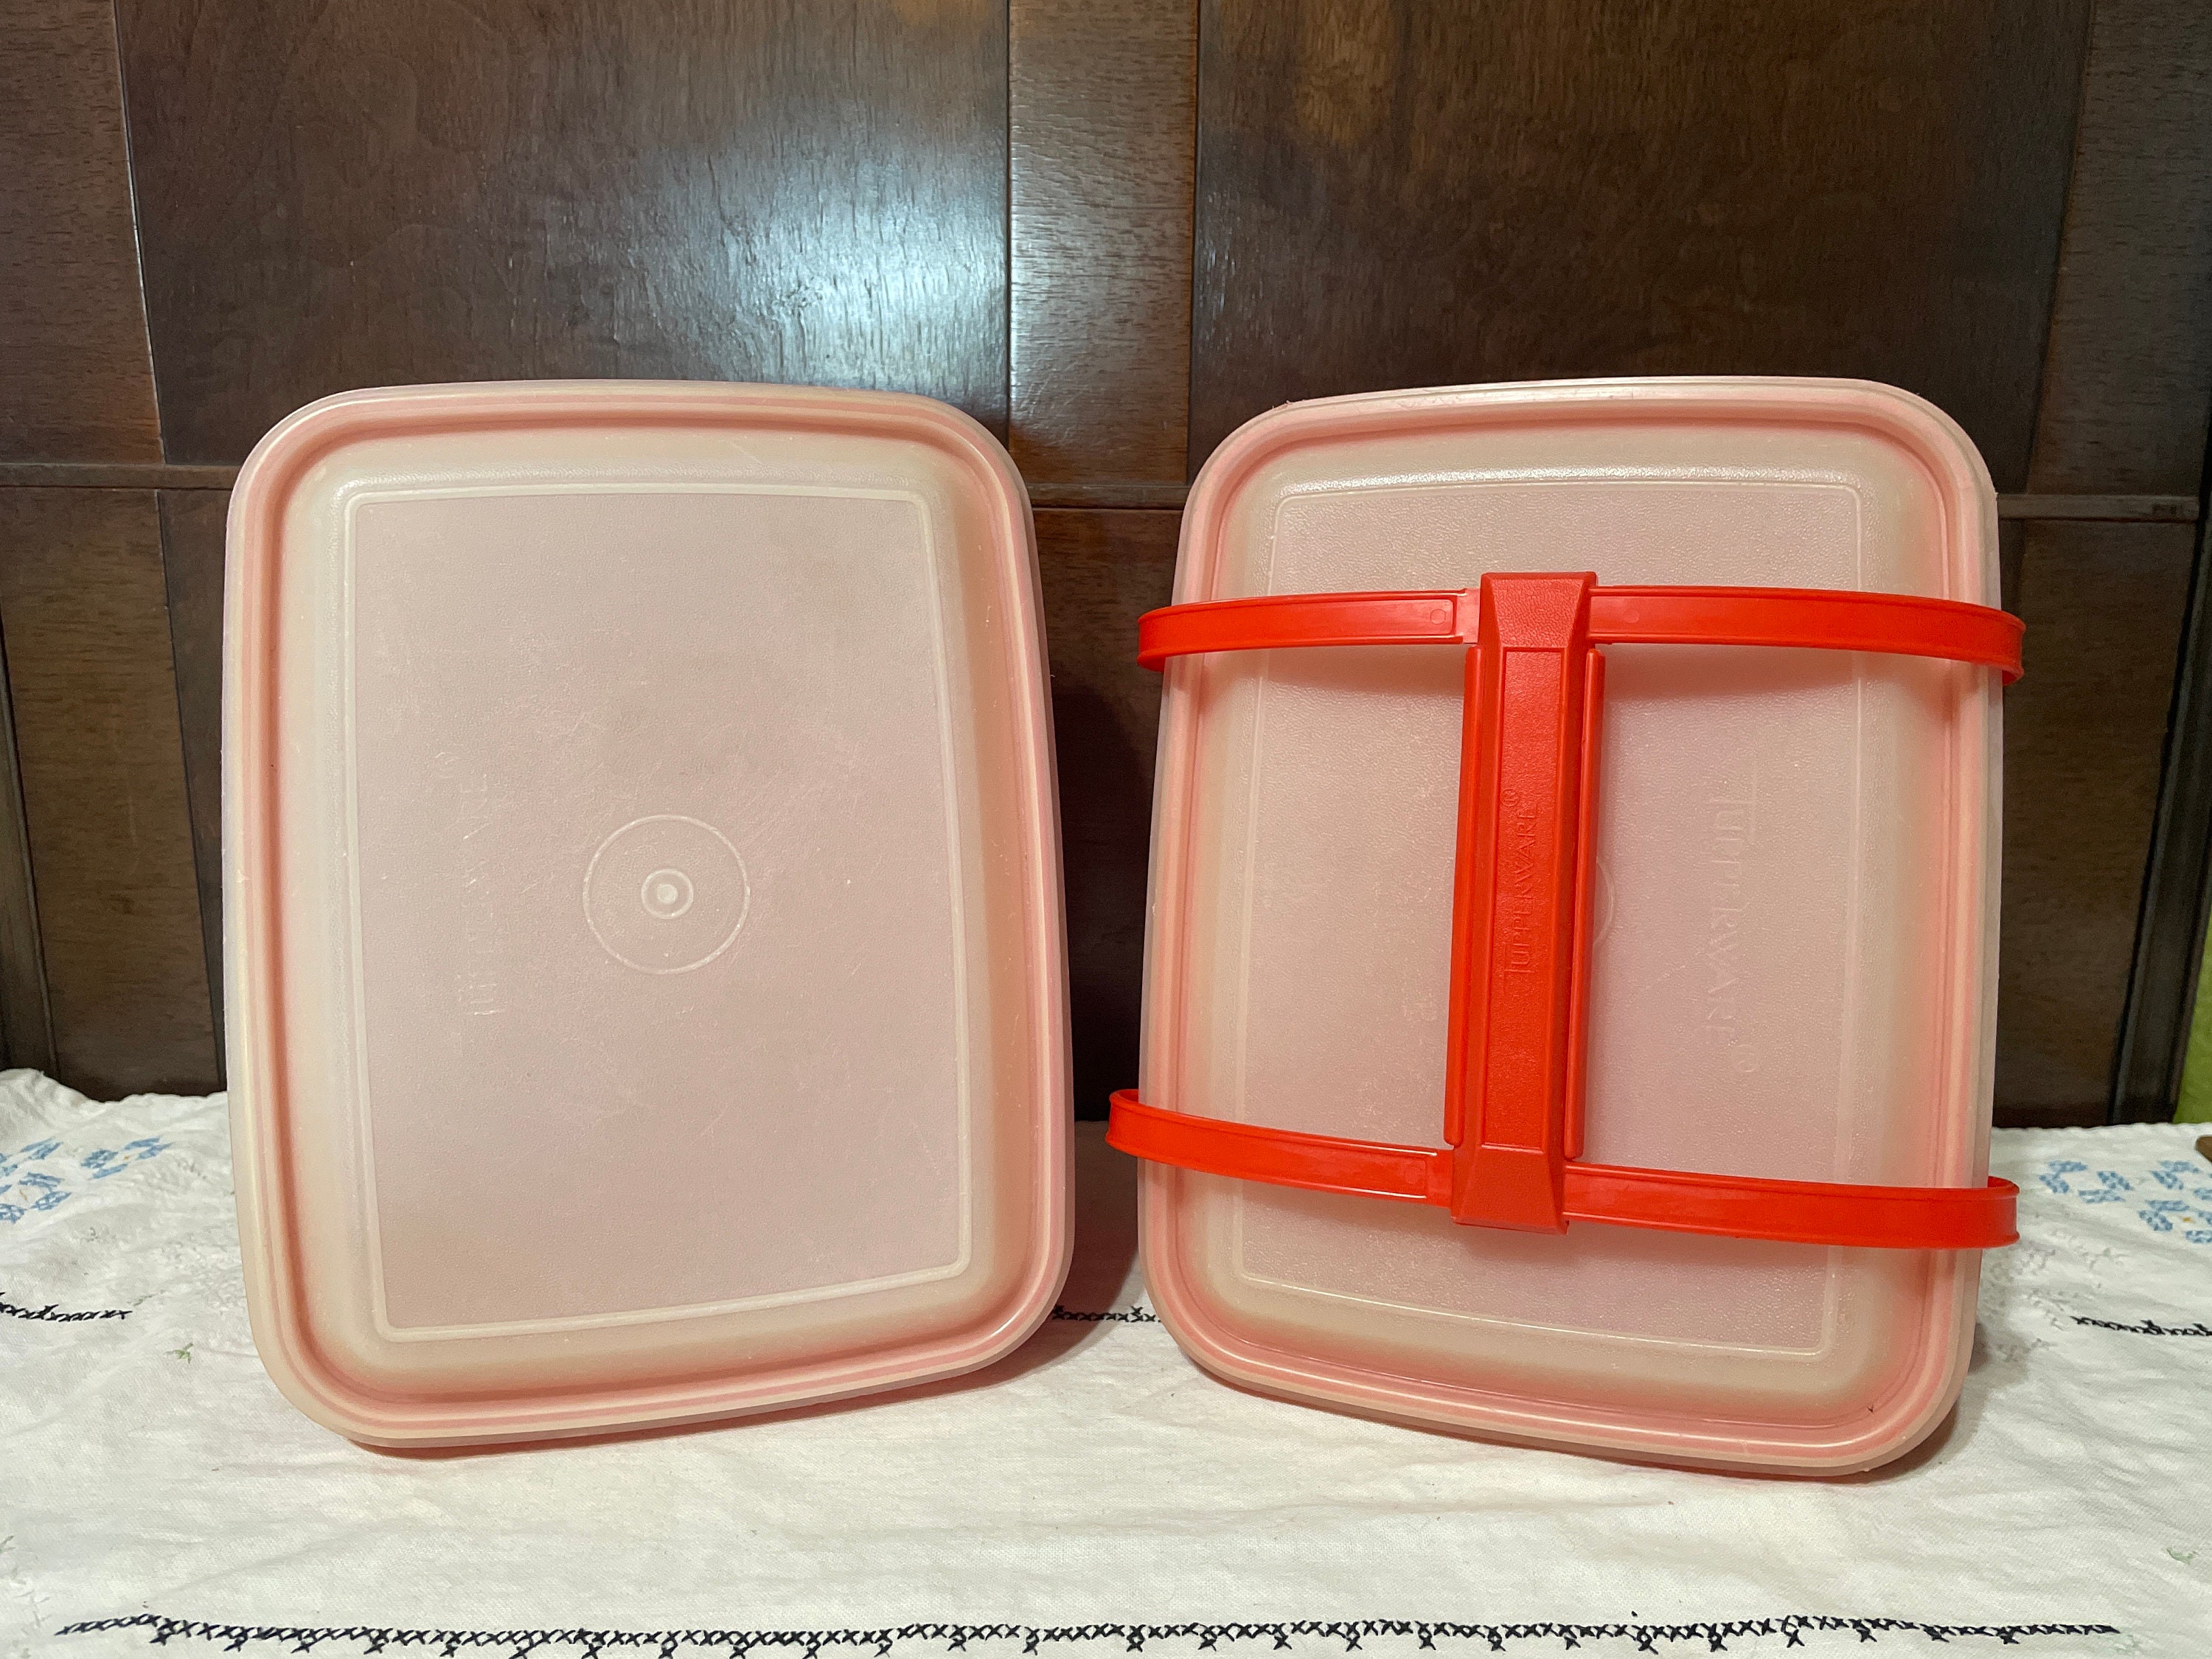 Tupperware Large & Small Slim Packette Container Divided Lunch Snack  Container Lot of 2 Daycare Brown Bag Fuzzy Eater Leftovers Storage -   Denmark